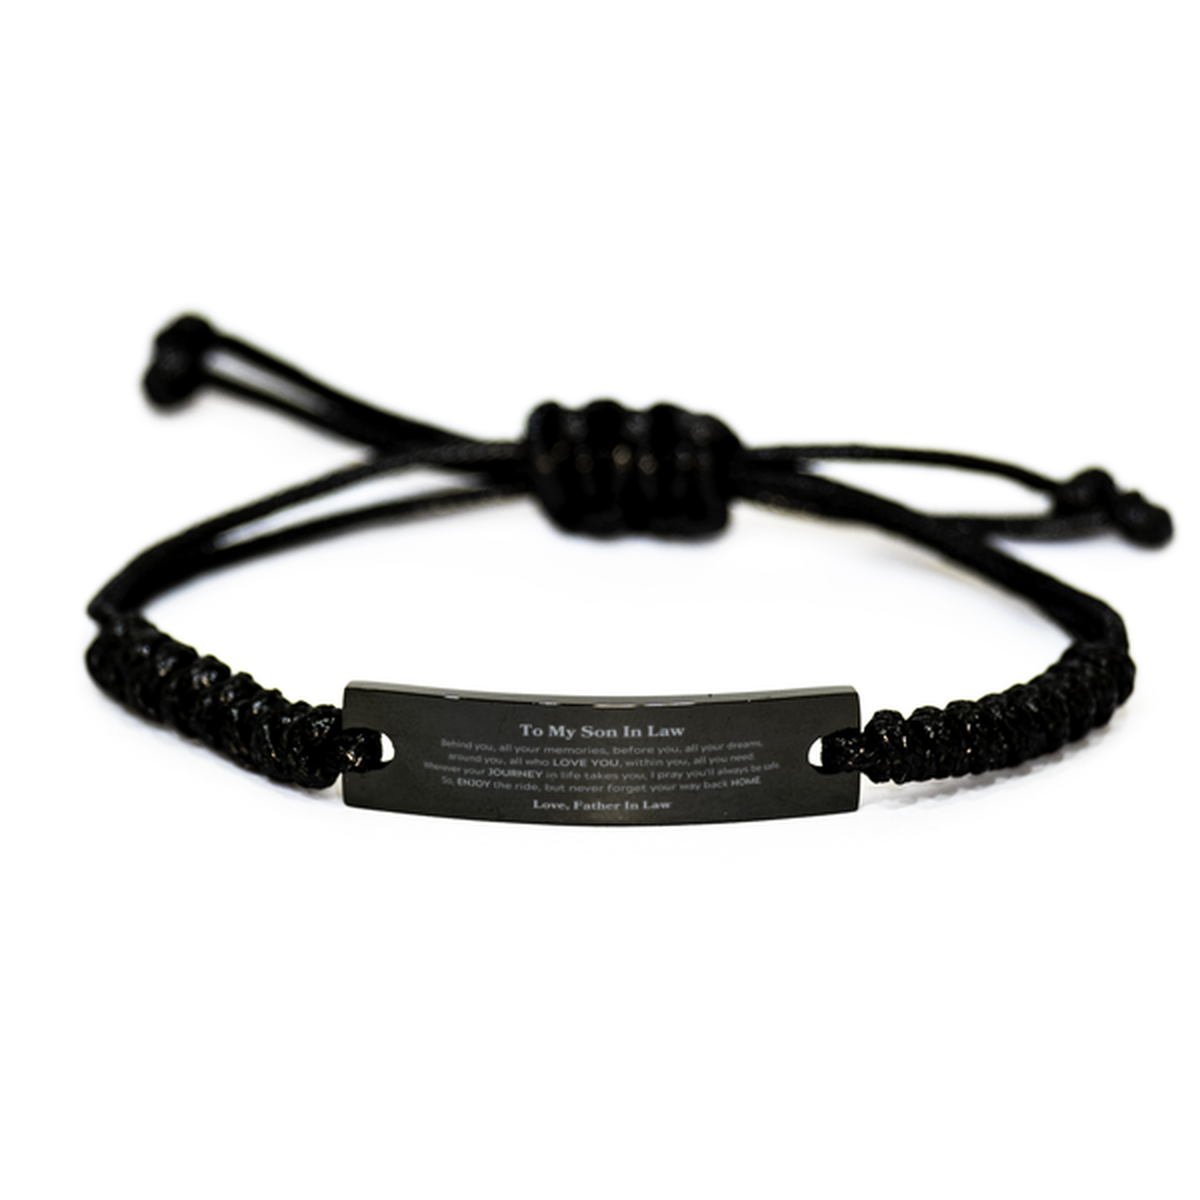 To My Son In Law Graduation Gifts from Father In Law, Son In Law Black Rope Bracelet Christmas Birthday Gifts for Son In Law Behind you, all your memories, before you, all your dreams. Love, Father In Law